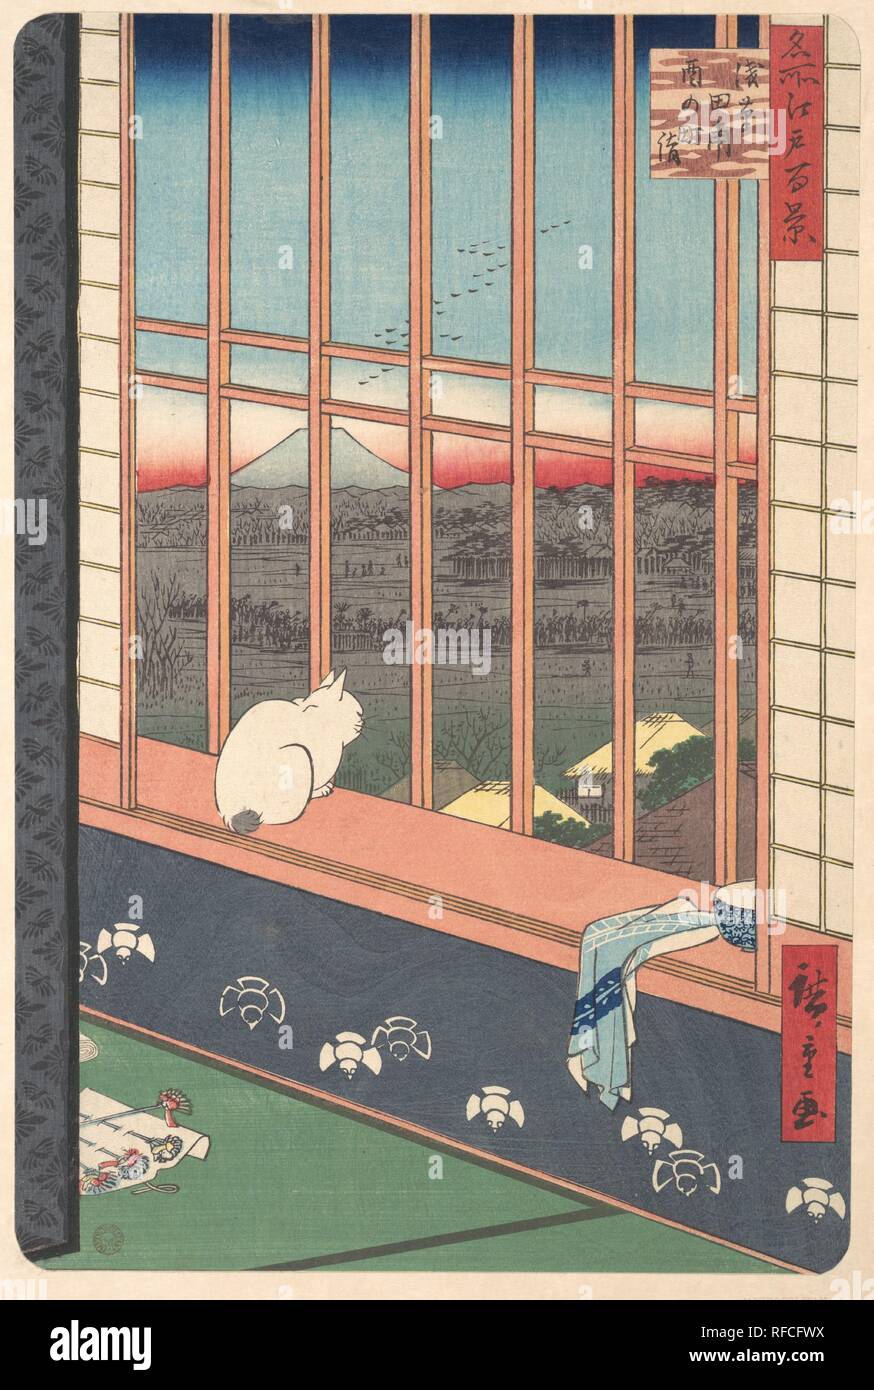 Revelers Returned from the Tori no Machi Festival at Asakusa, from the series One Hundred Famous Views of Edo. Artist: Utagawa Hiroshige (Japanese, Tokyo (Edo) 1797-1858 Tokyo (Edo)). Culture: Japan. Dimensions: 13 1/16 x 8 11/16 in. (33.2 x 22.1 cm). Date: 1857.  The inscription on this print tells us that the scene is located in Asakusa Tammbo, a famous gay quarter located in the eastern part of Edo. One can therefore surmise that this is one of the geisha houses for which Asakusa Tammbo was known. Perhaps the hostess and her guest are on the other side of he folding screen, which stands on  Stock Photo